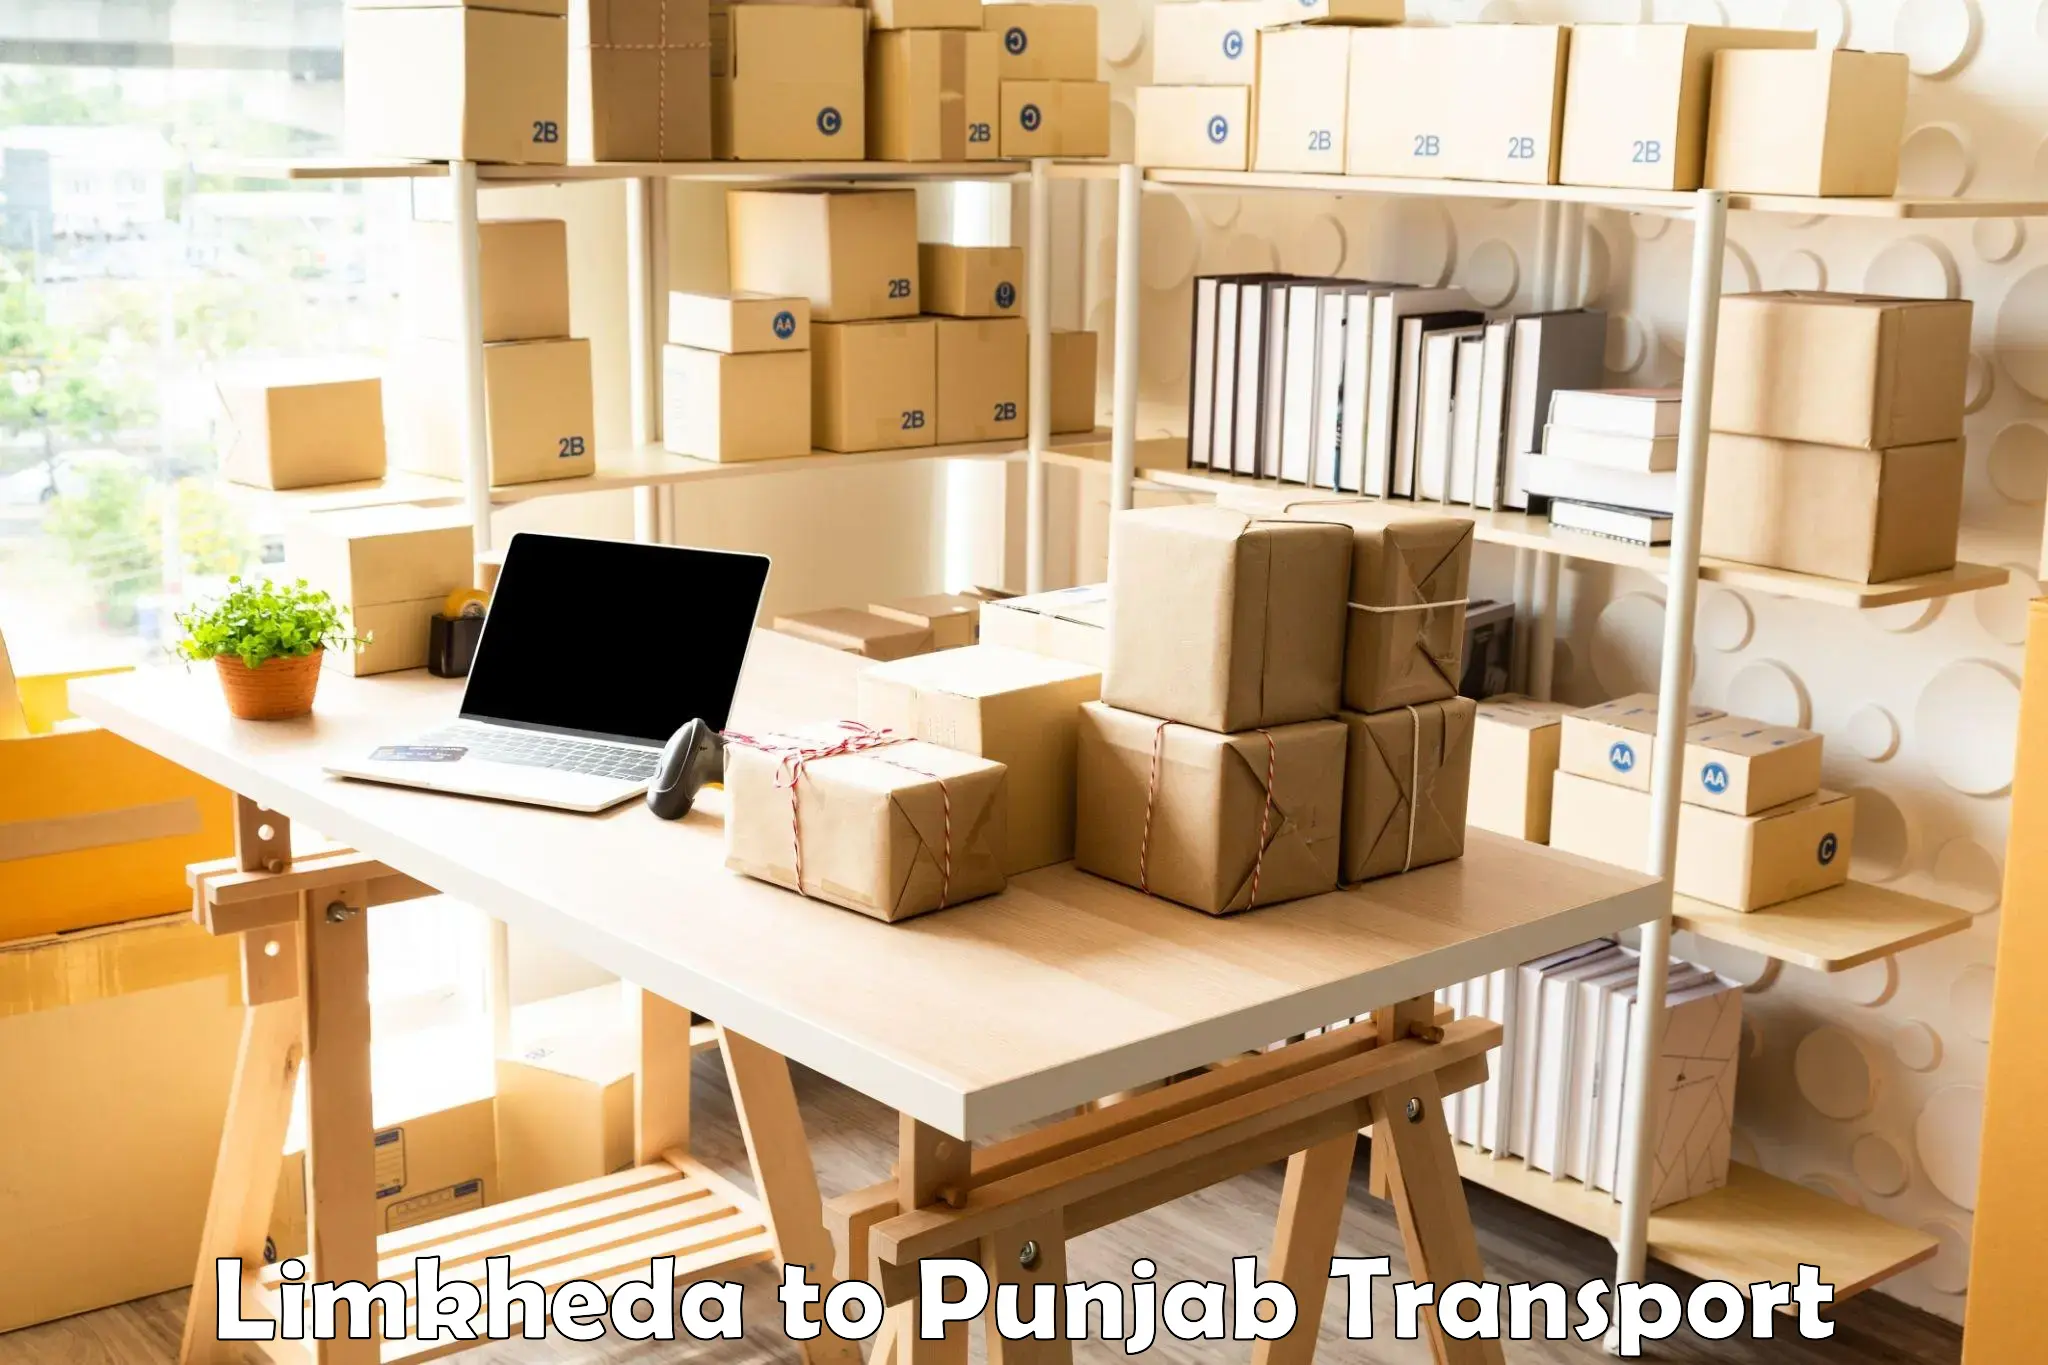 Vehicle courier services in Limkheda to Ludhiana